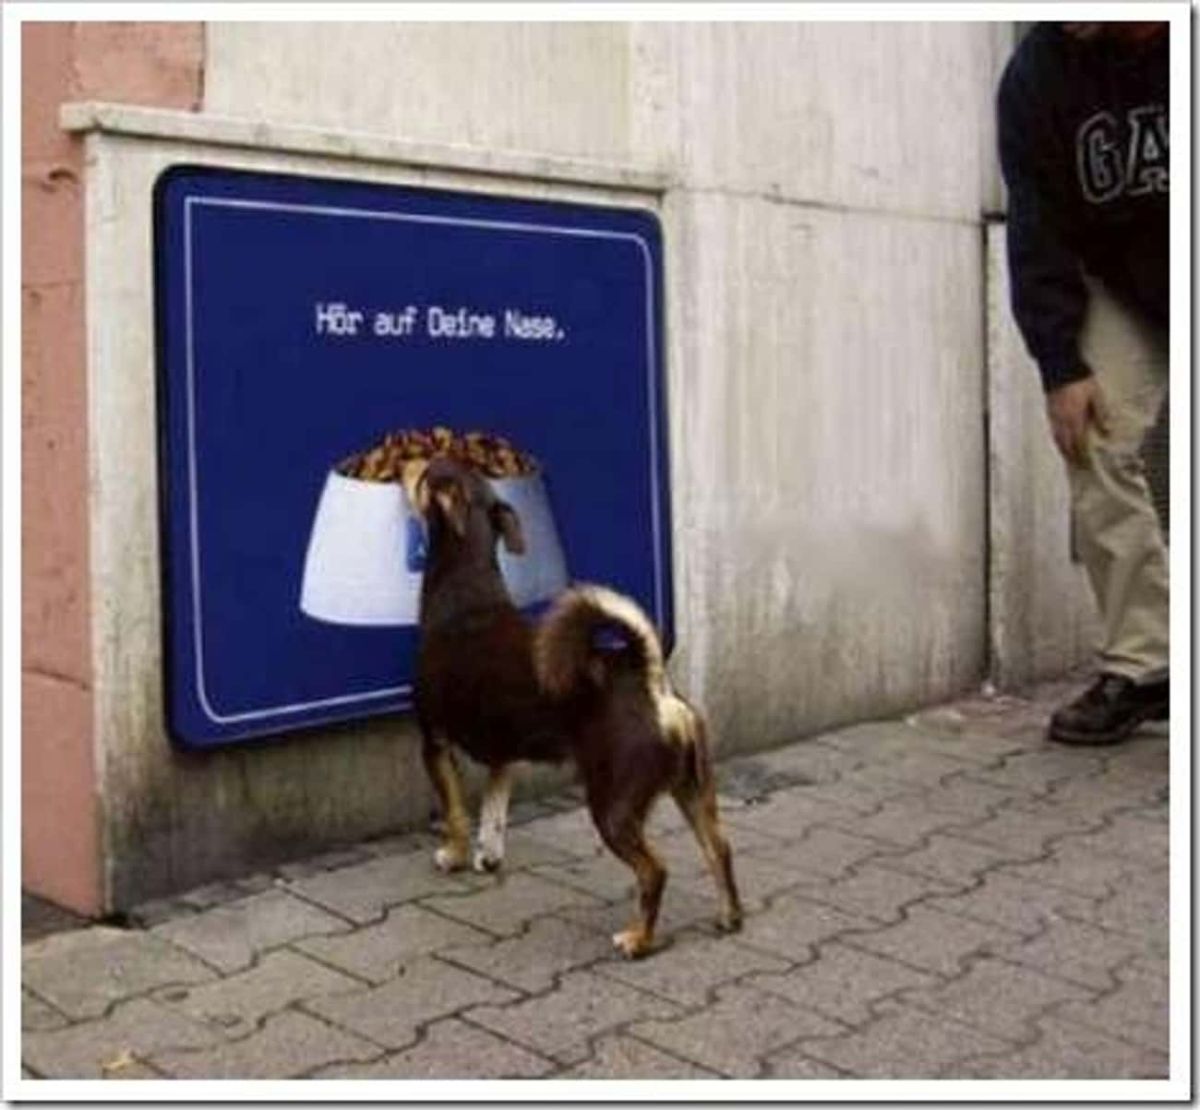 brown dog trying to eat the dog food in a blue poster